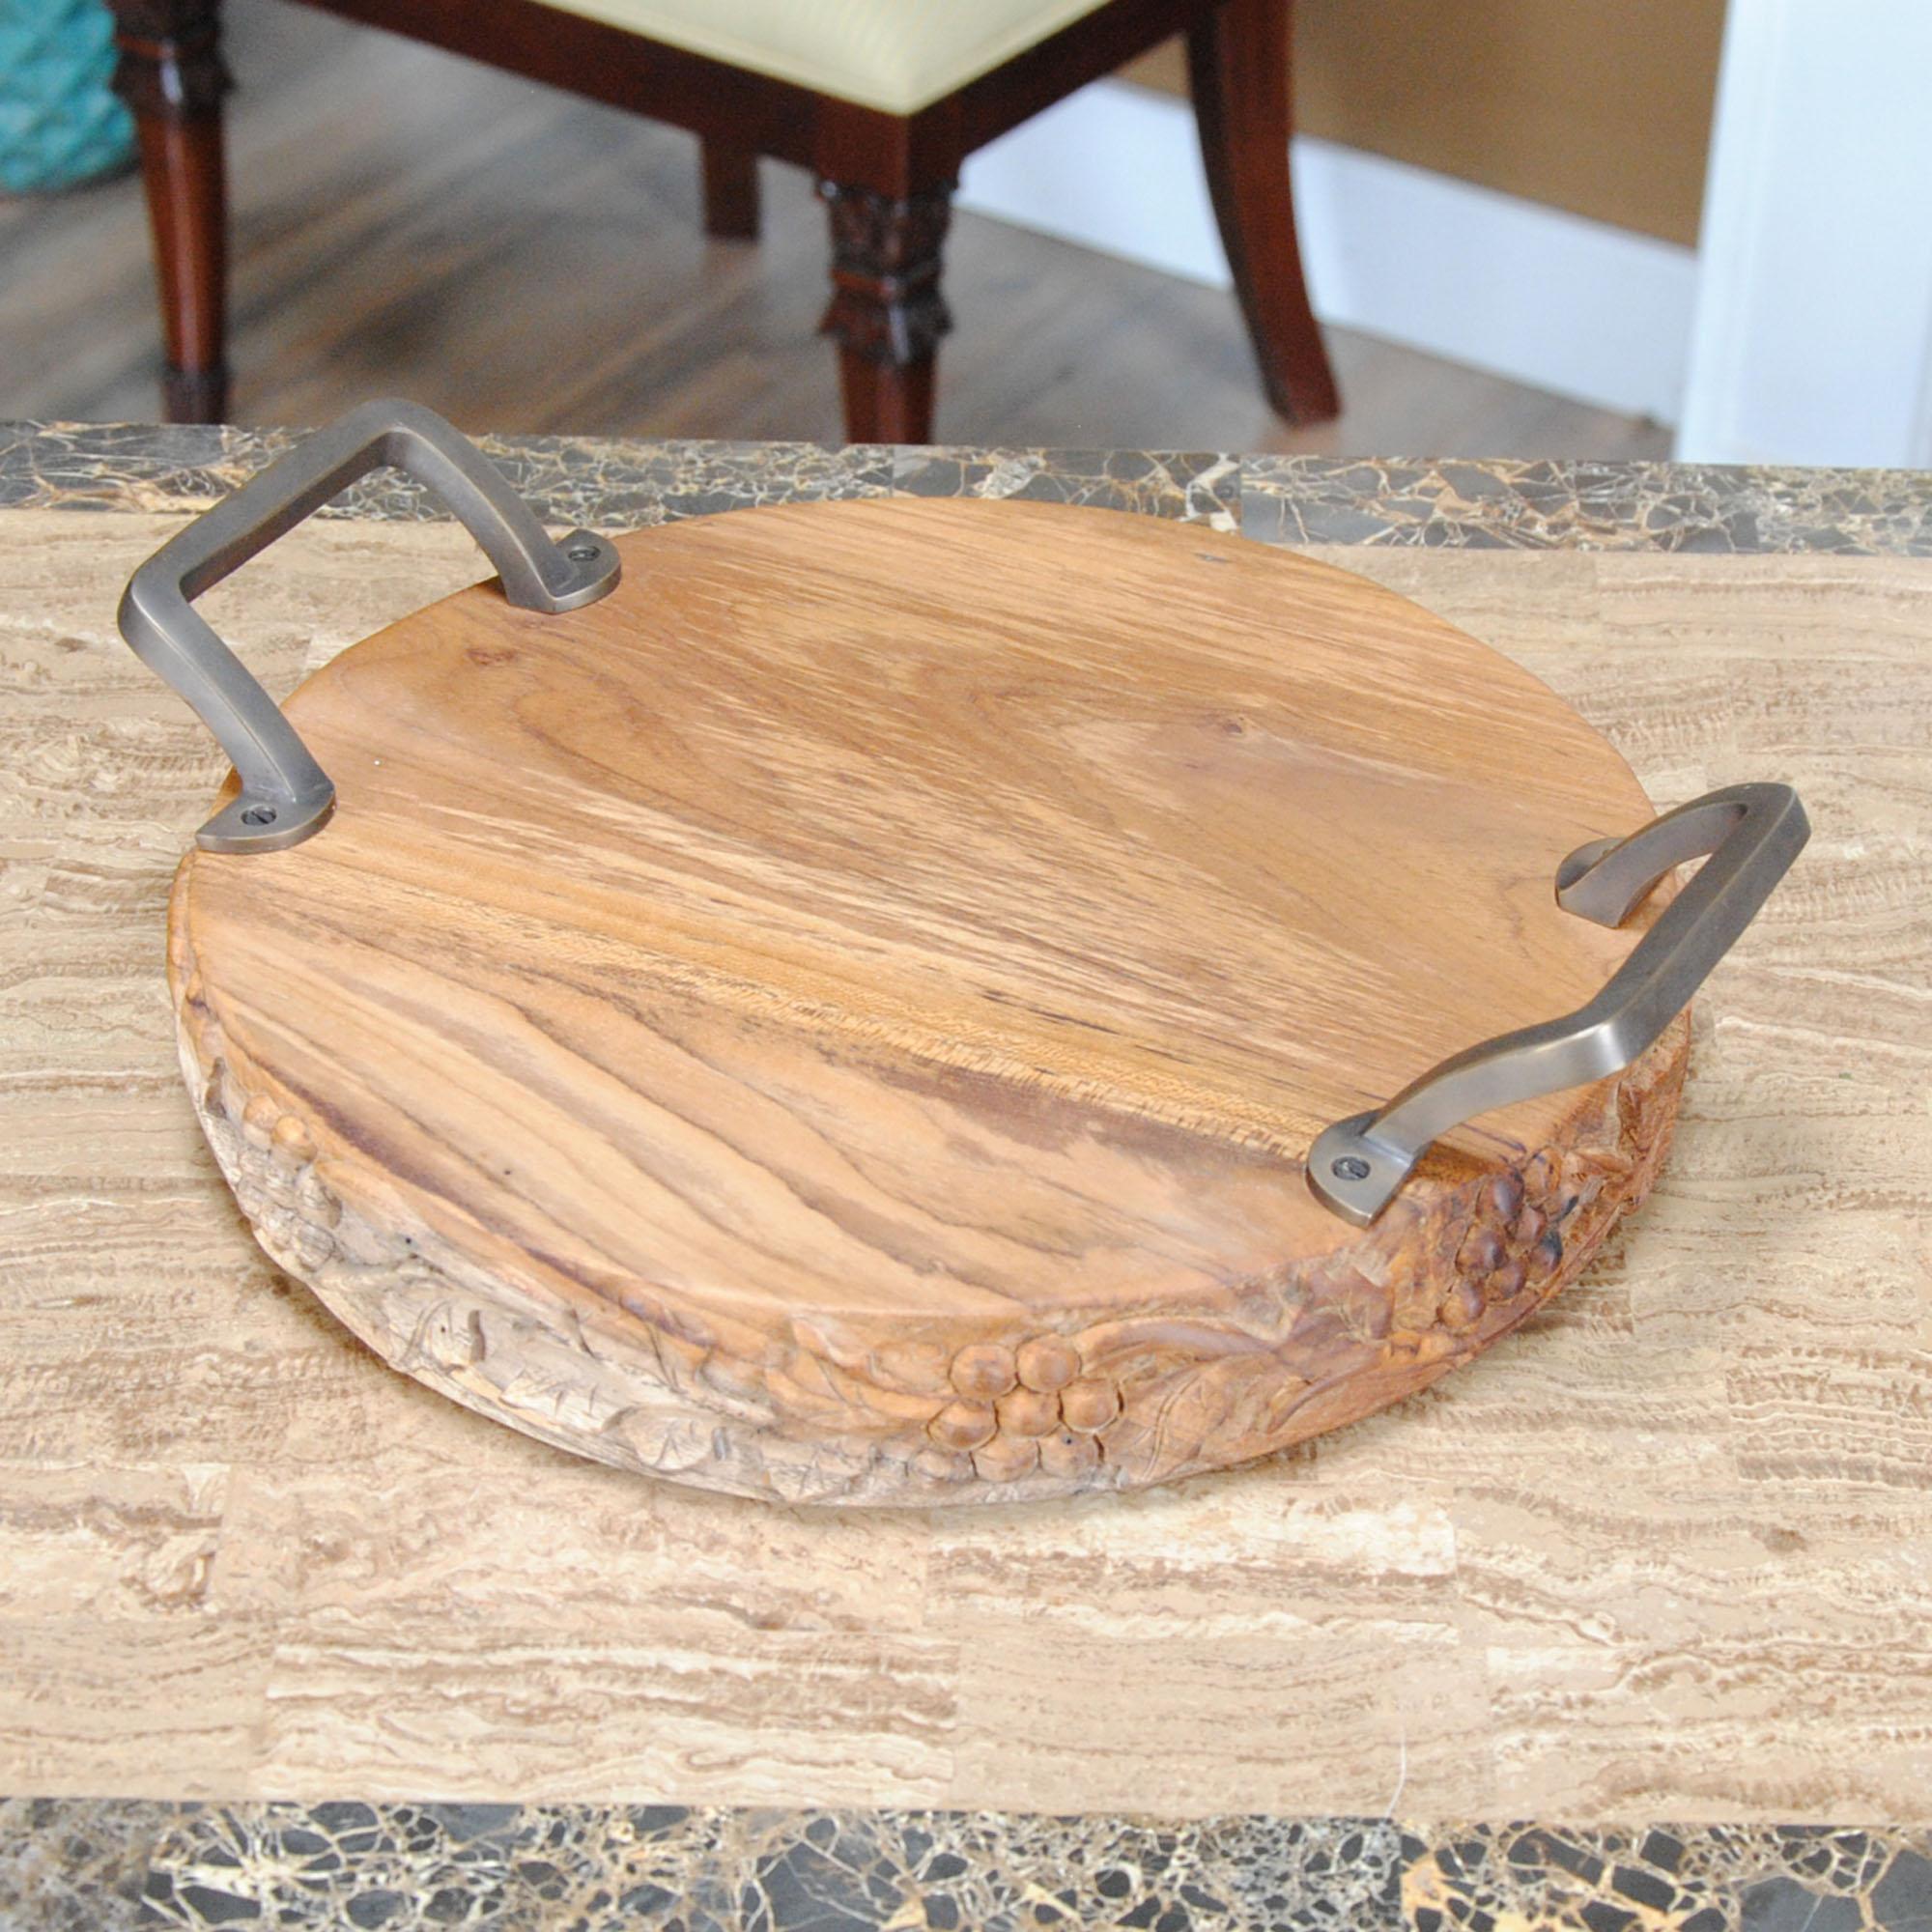 From Niagara Furniture, this Grape Carved Teak Serving Platter with Handles is produced from solid teak wood and solid brass.  Decorative and beautiful hand carved grape motif accentuates the amazing Teak wood, ideal for serving up some crackers and